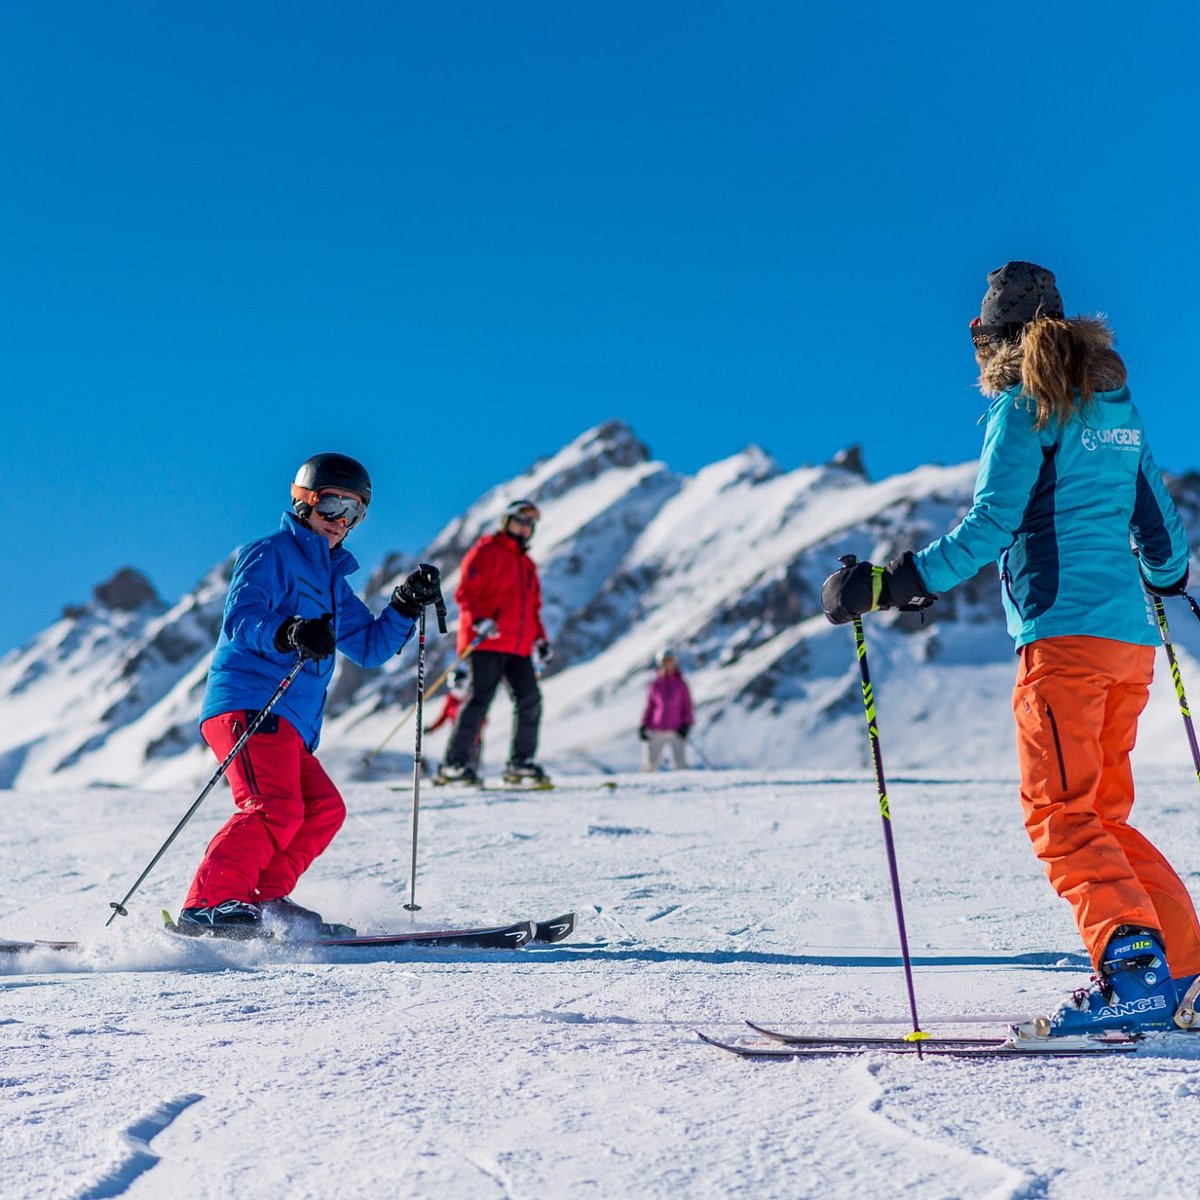 Oxygene Ski & Snowboard School Val d'Isere - All You Need to